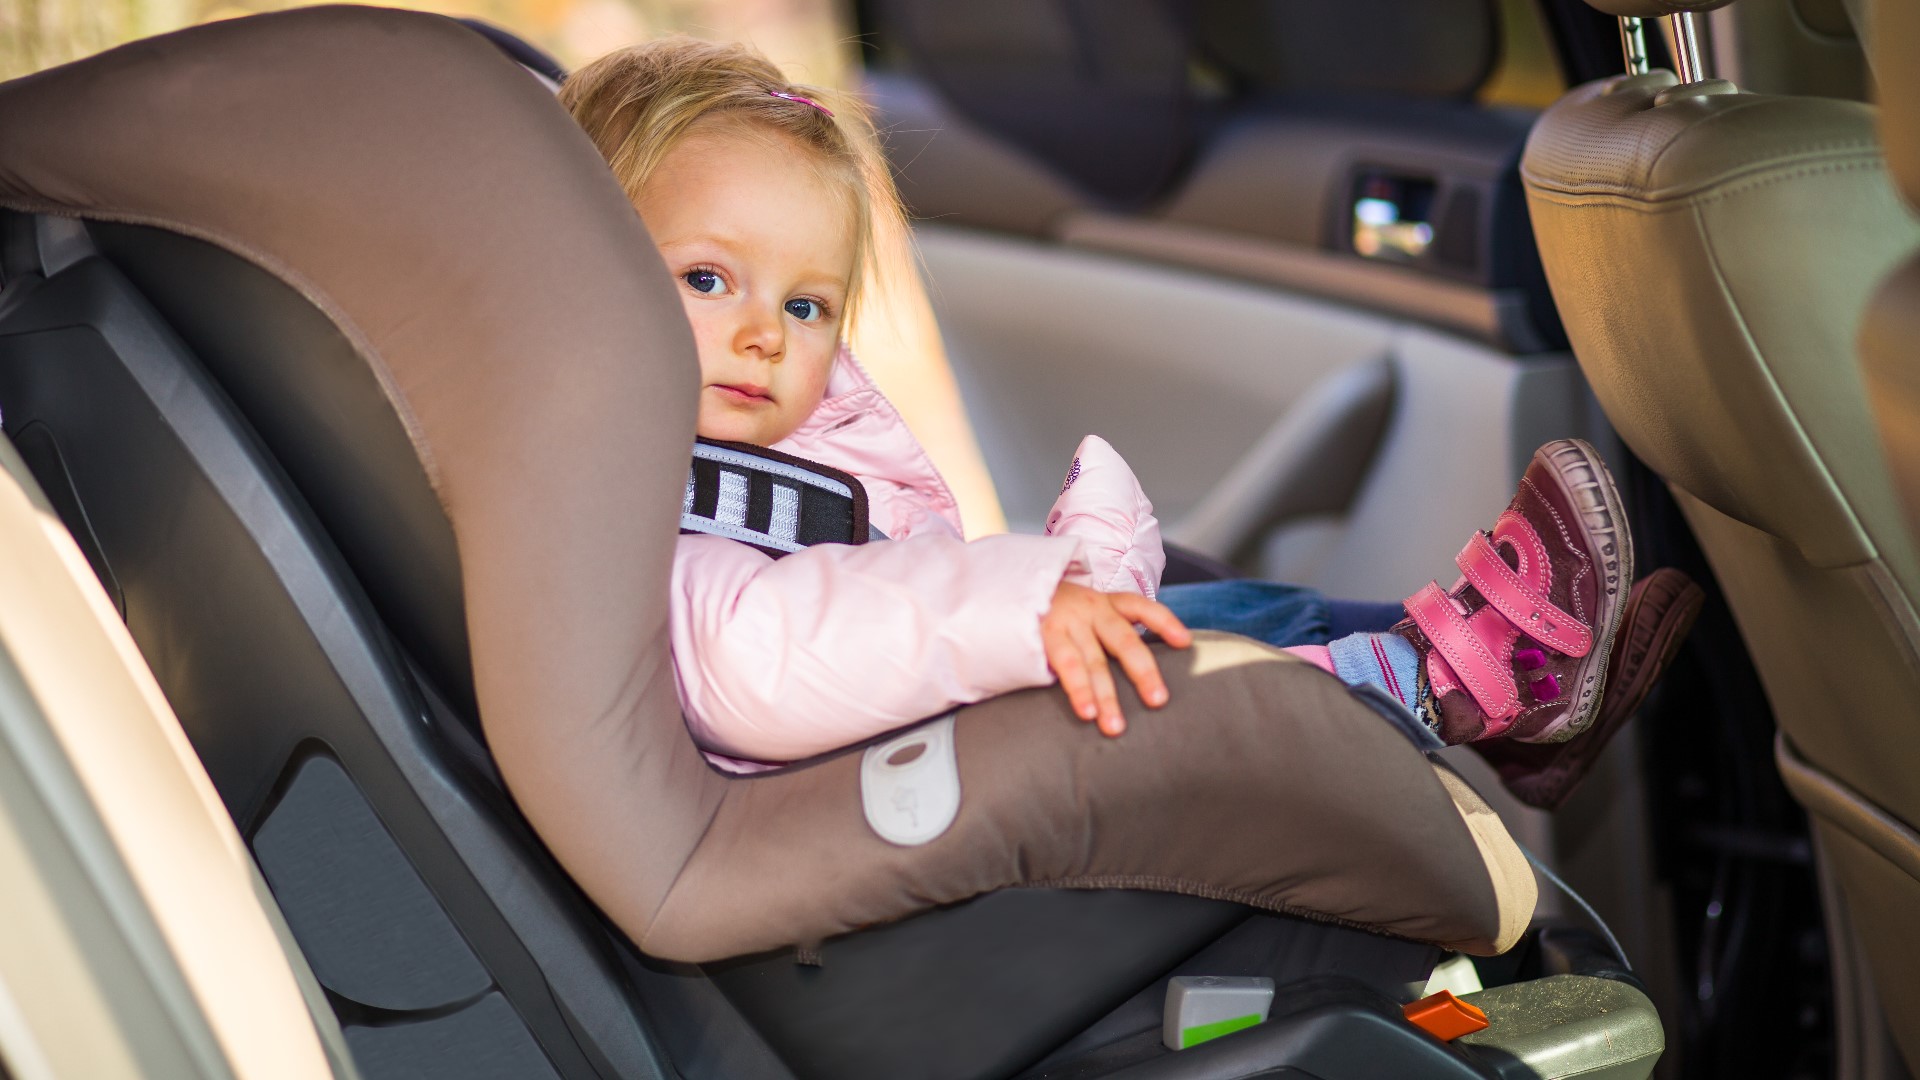 Bulky clothing, including winter coats and snowsuits, should never be worn underneath the harness of a car seat.